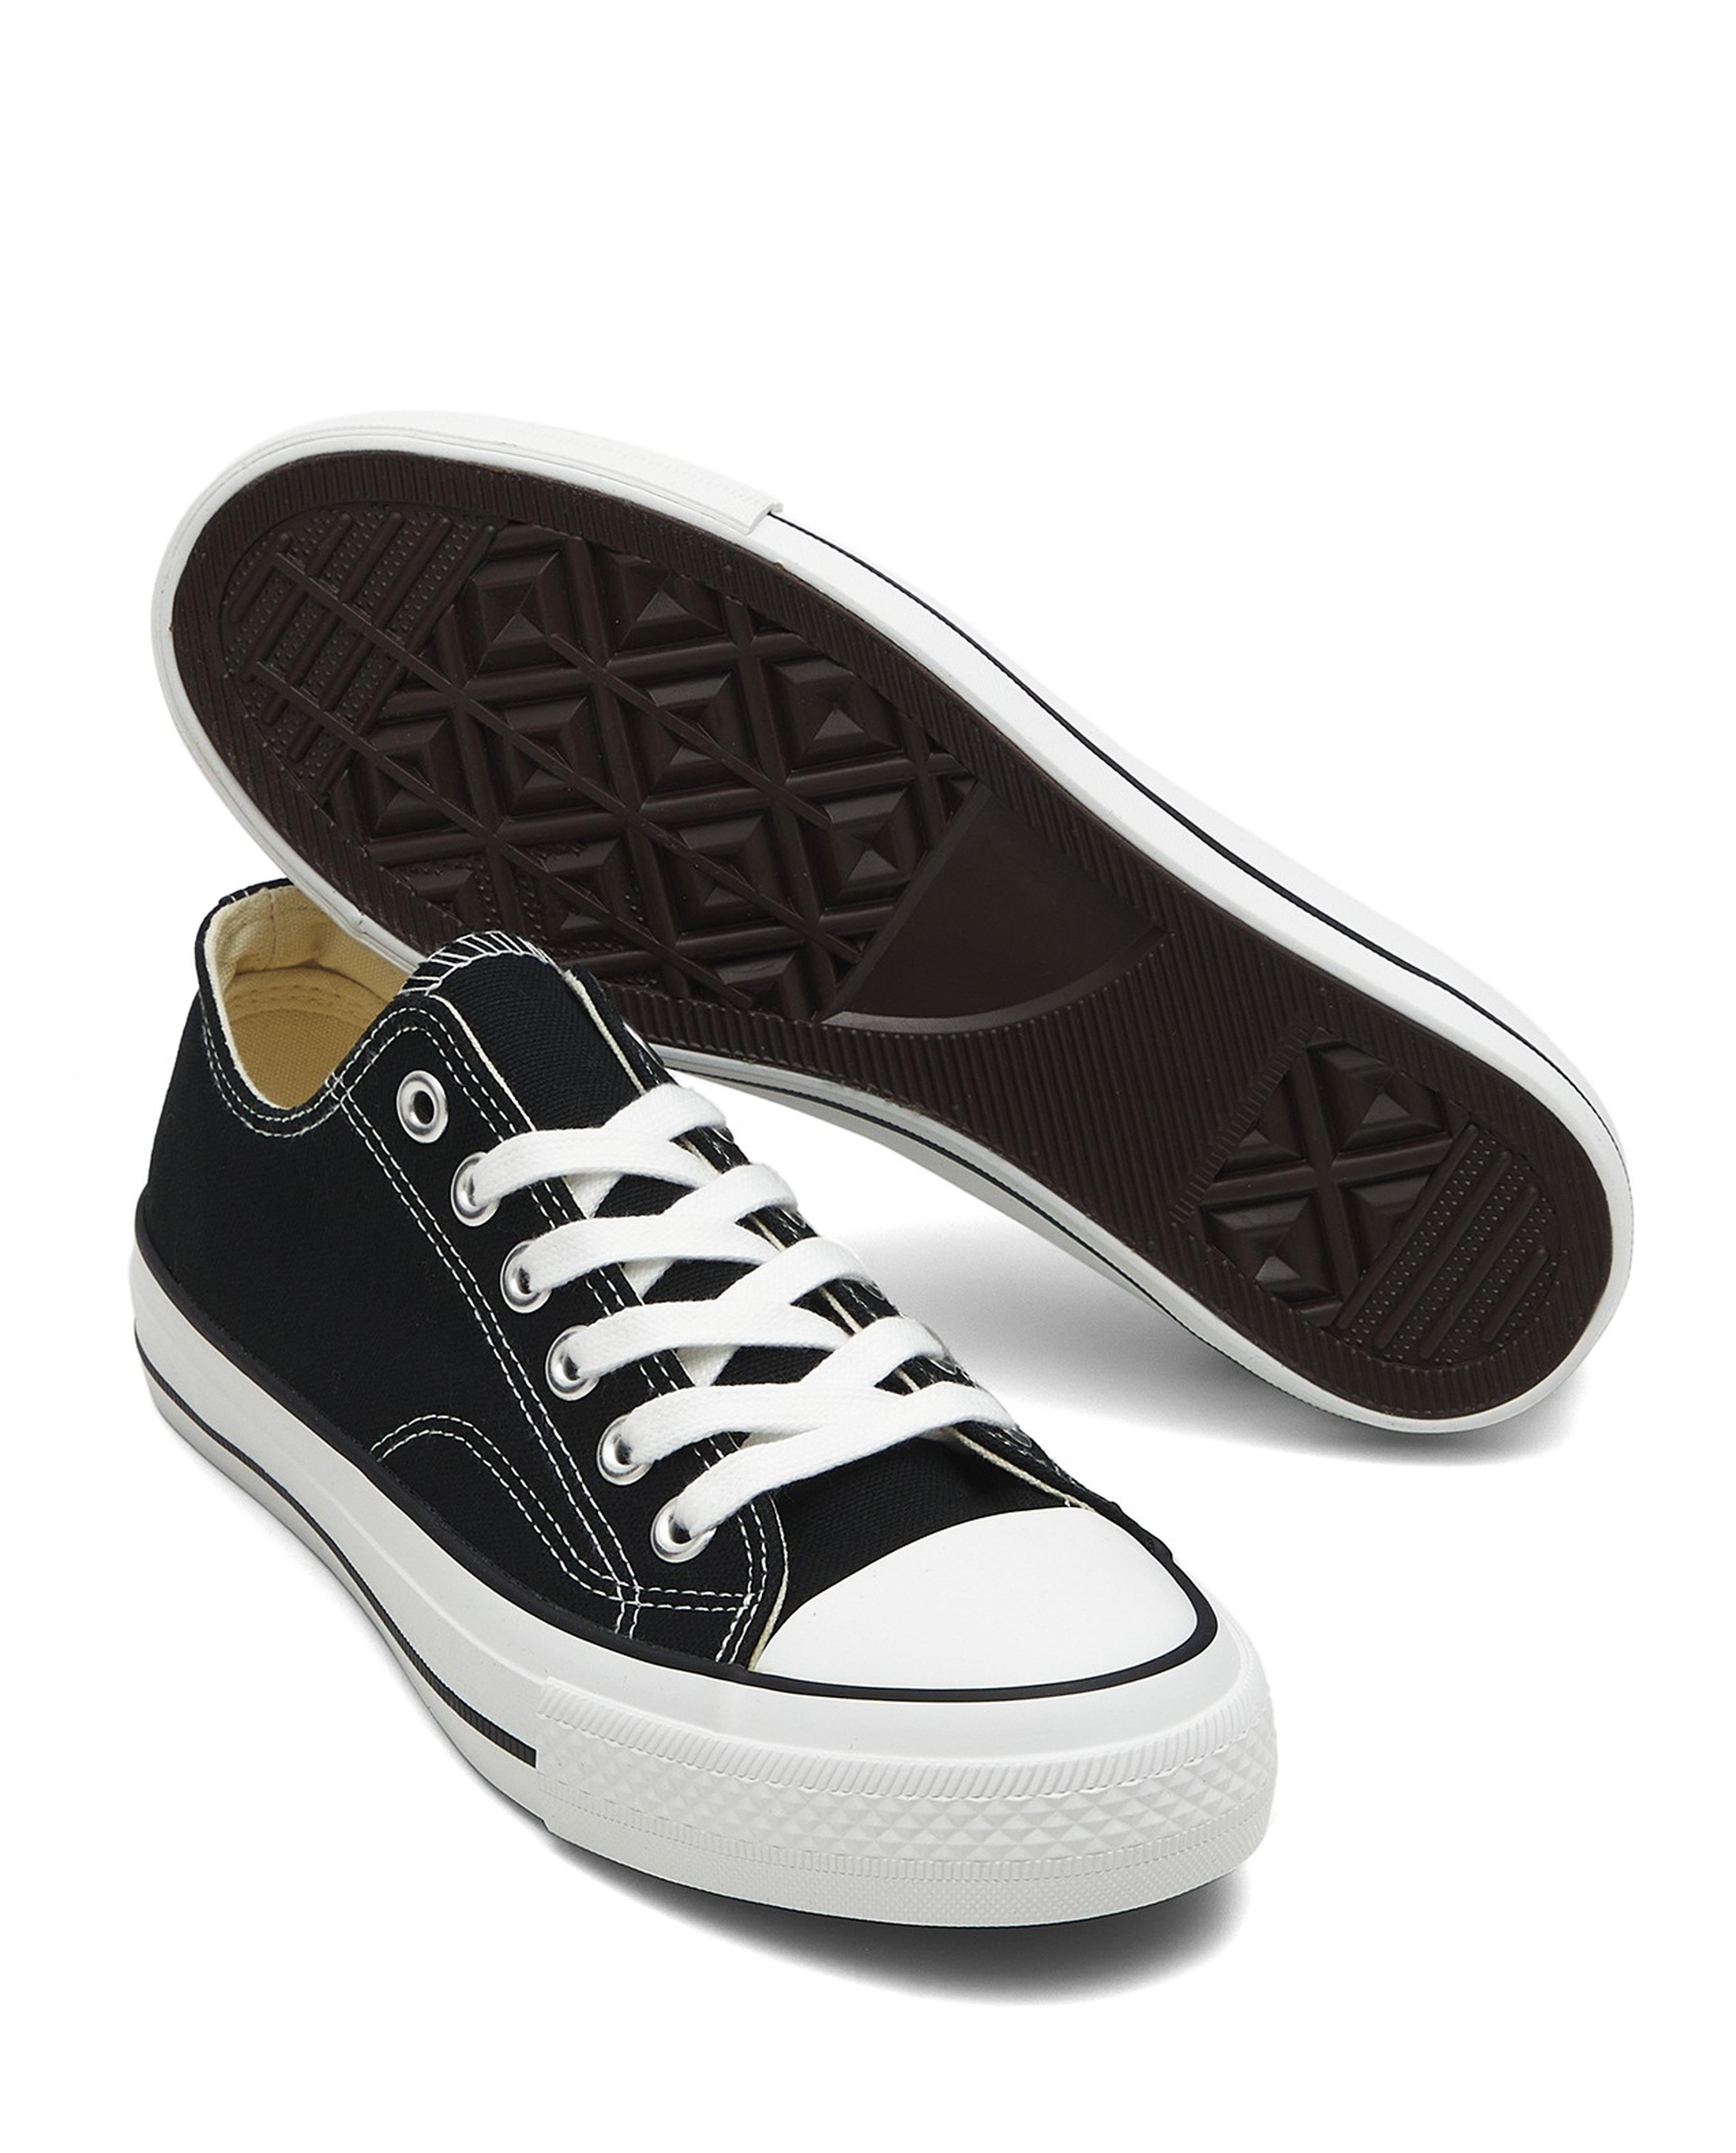 Lace-Up Canvas Casual Shoes